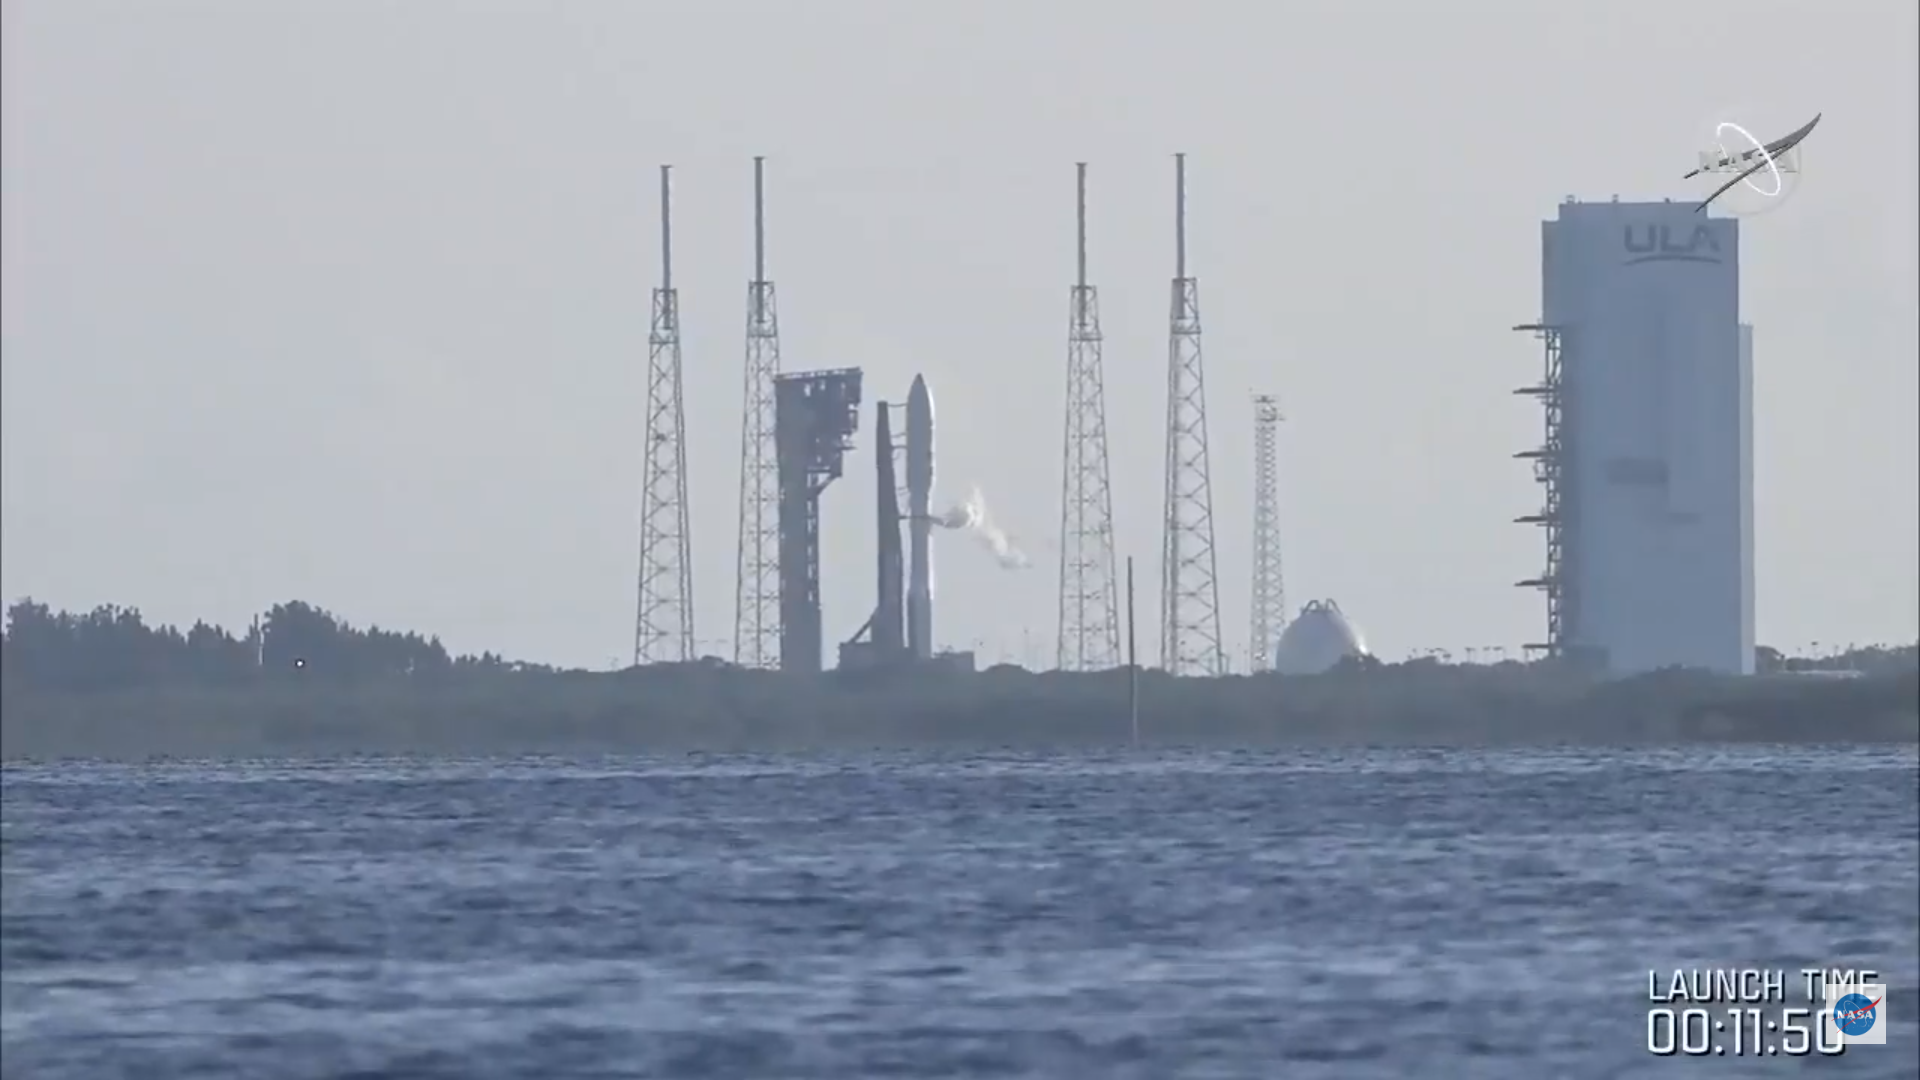 A view of the Mars 2020 mission's ULA Atlas V rocket as seen before launch on July 30, 2020.